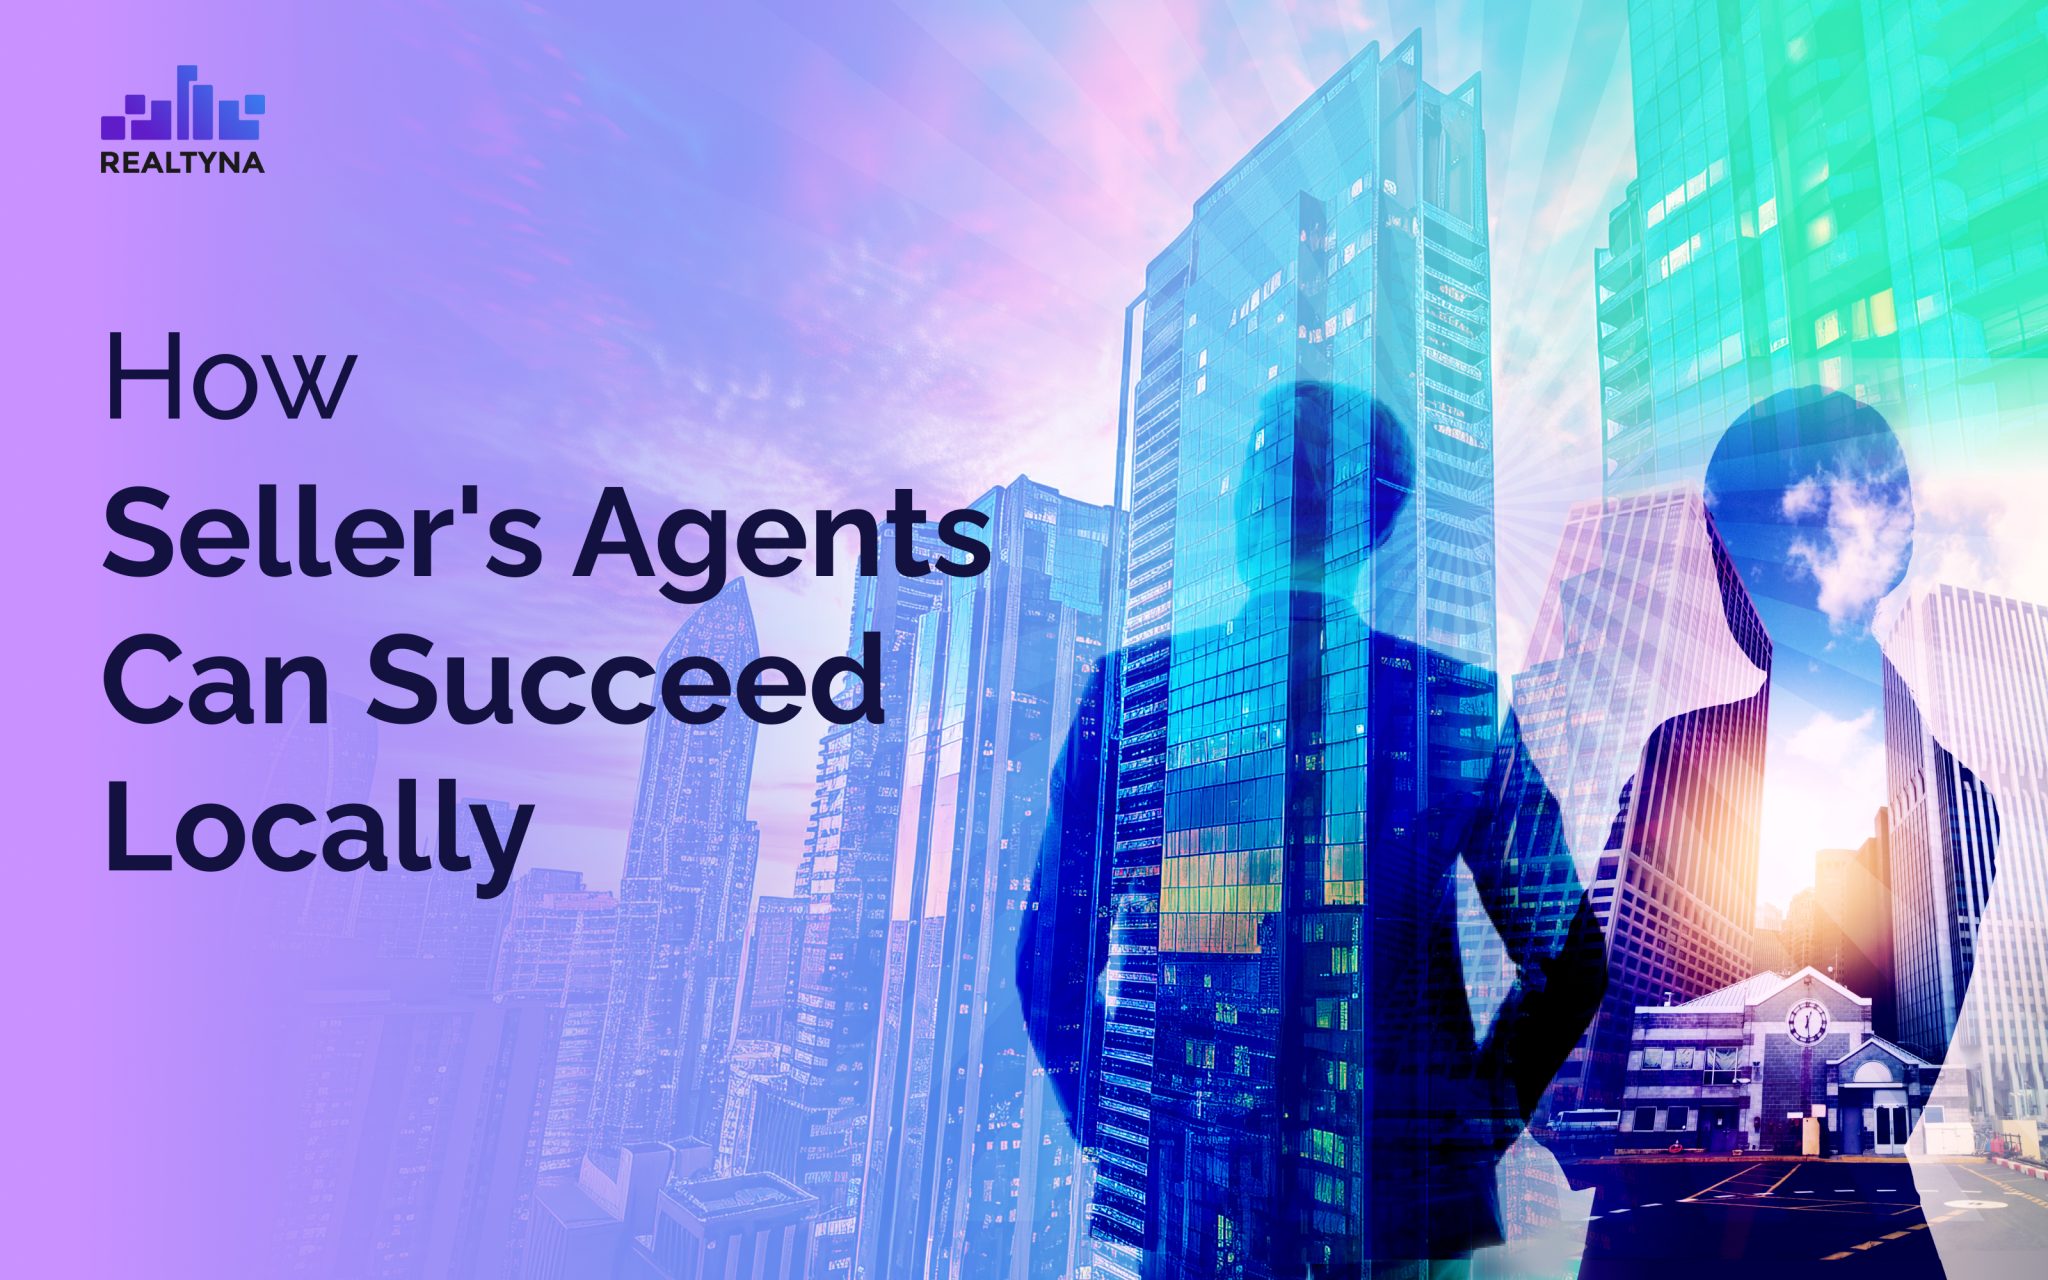 rna sellers agents succeed locally